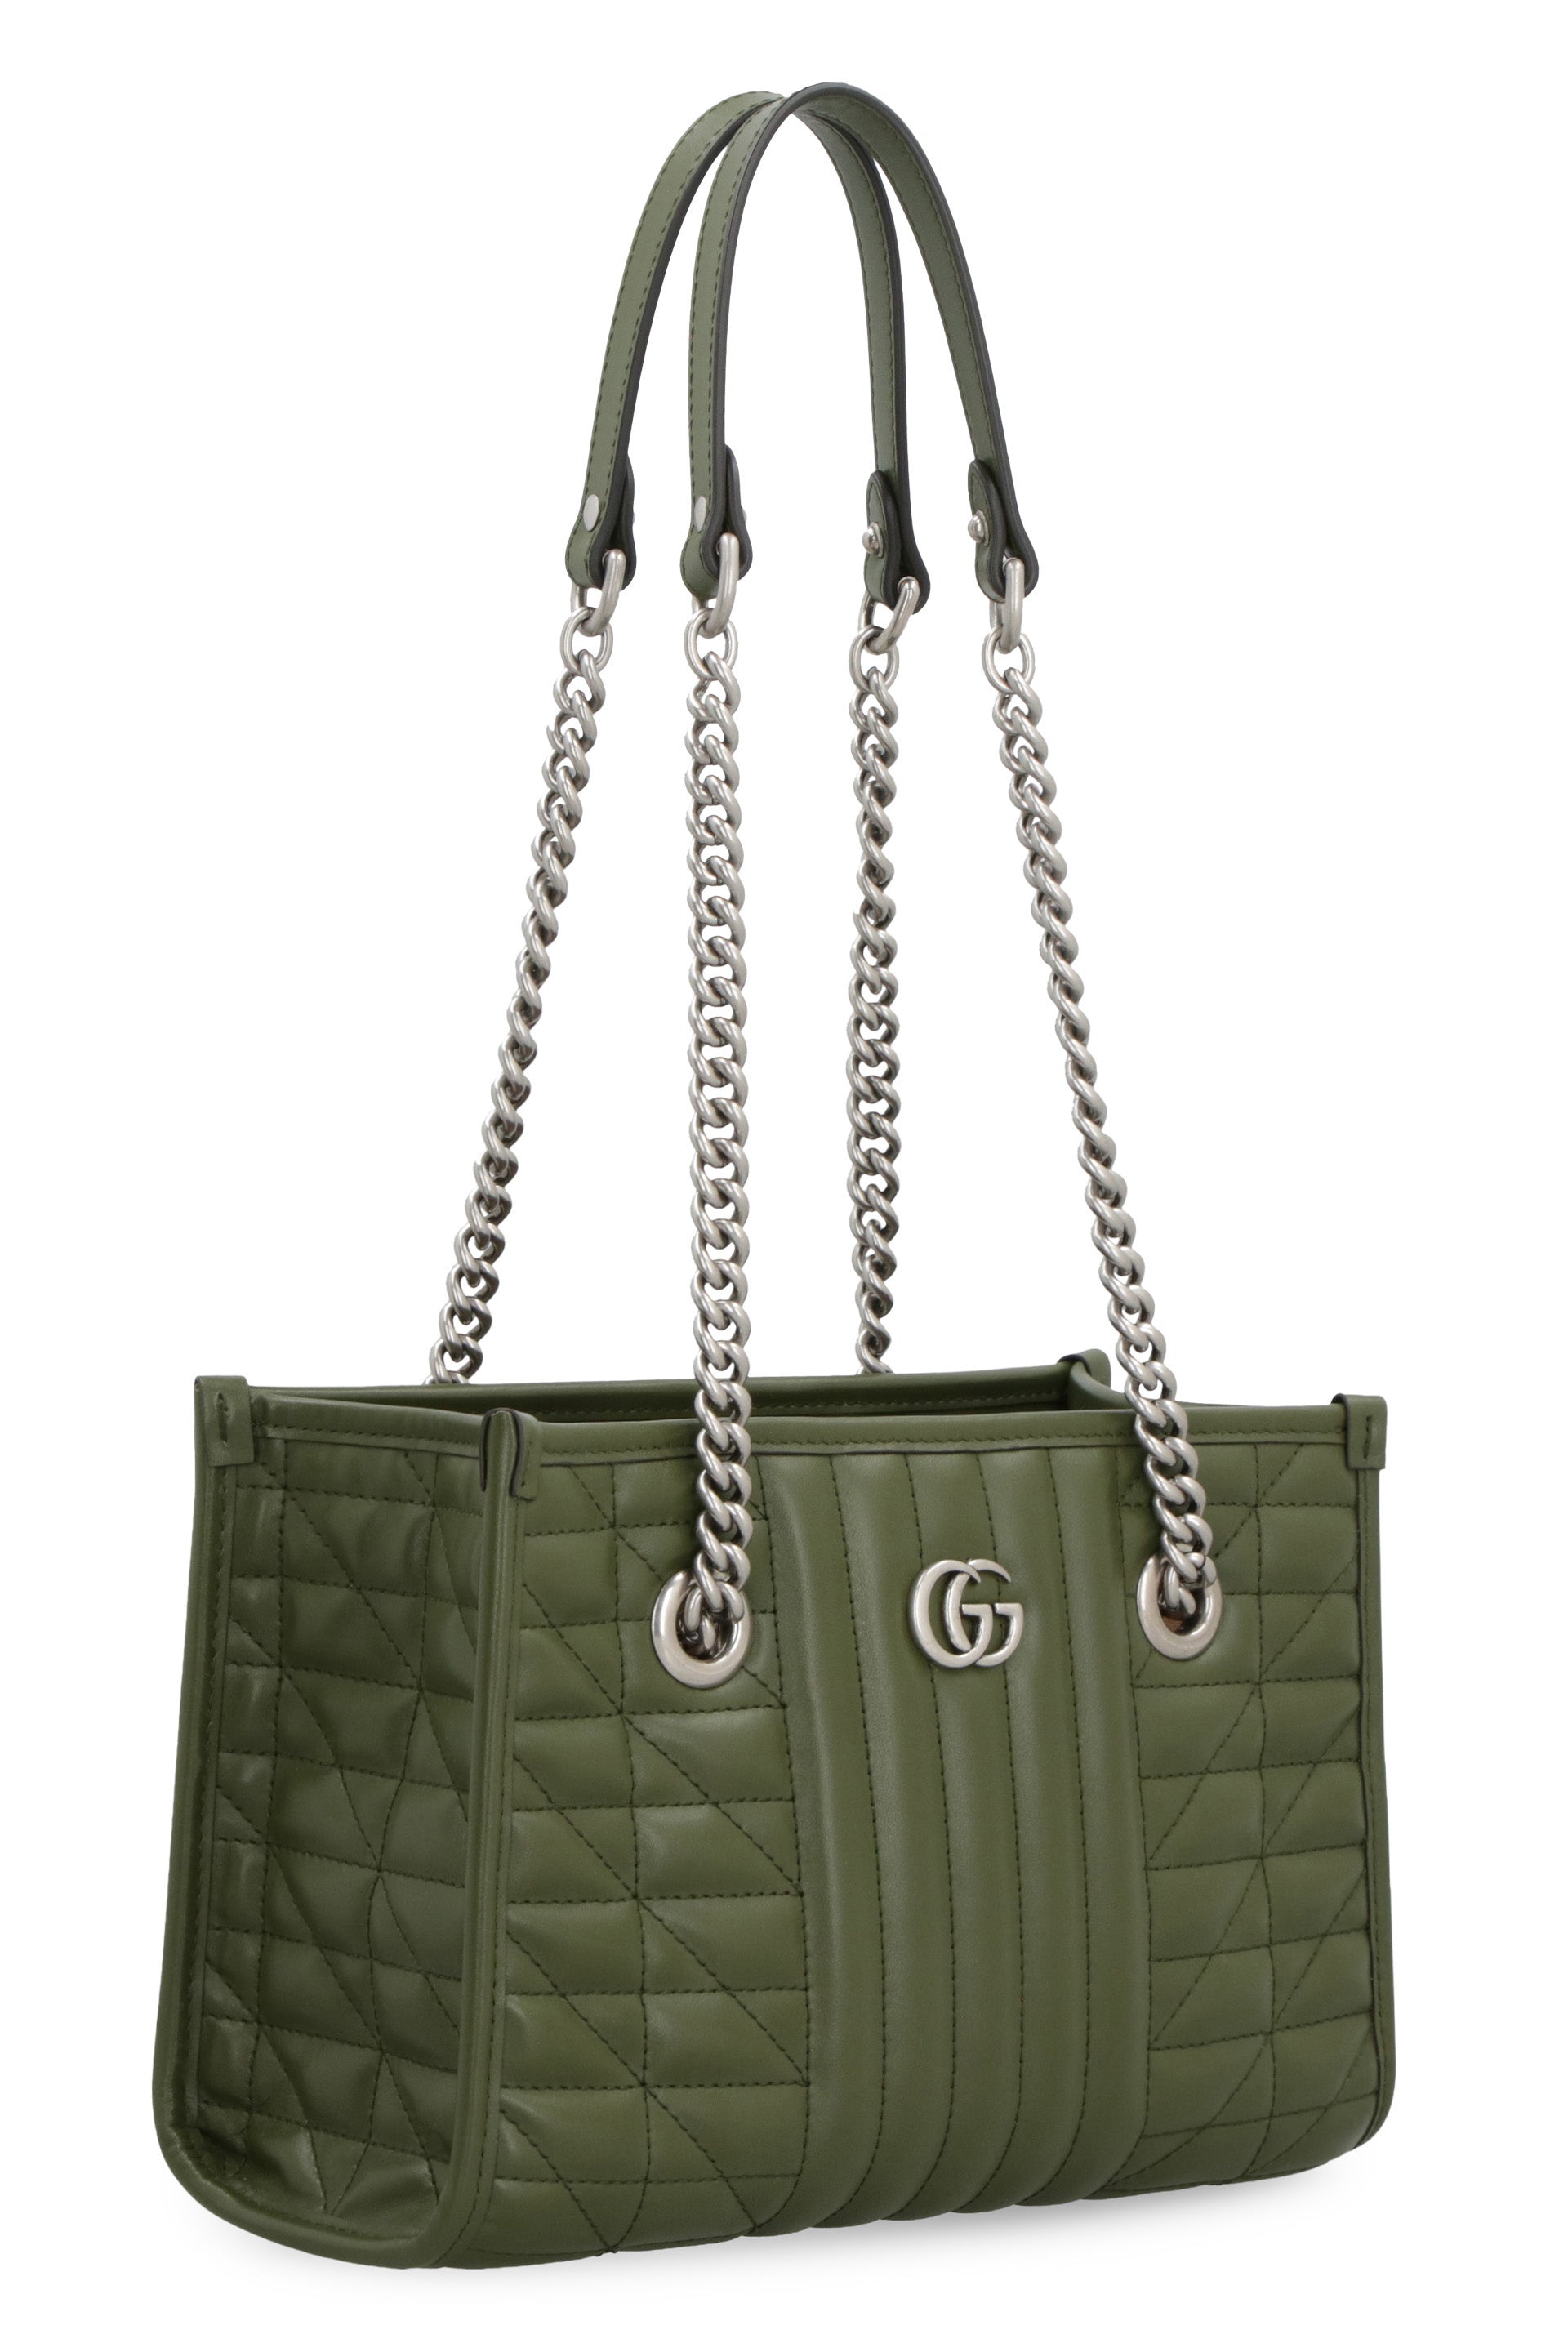 Gucci - GG Marmont Quilted Leather Bag - Female - Tu